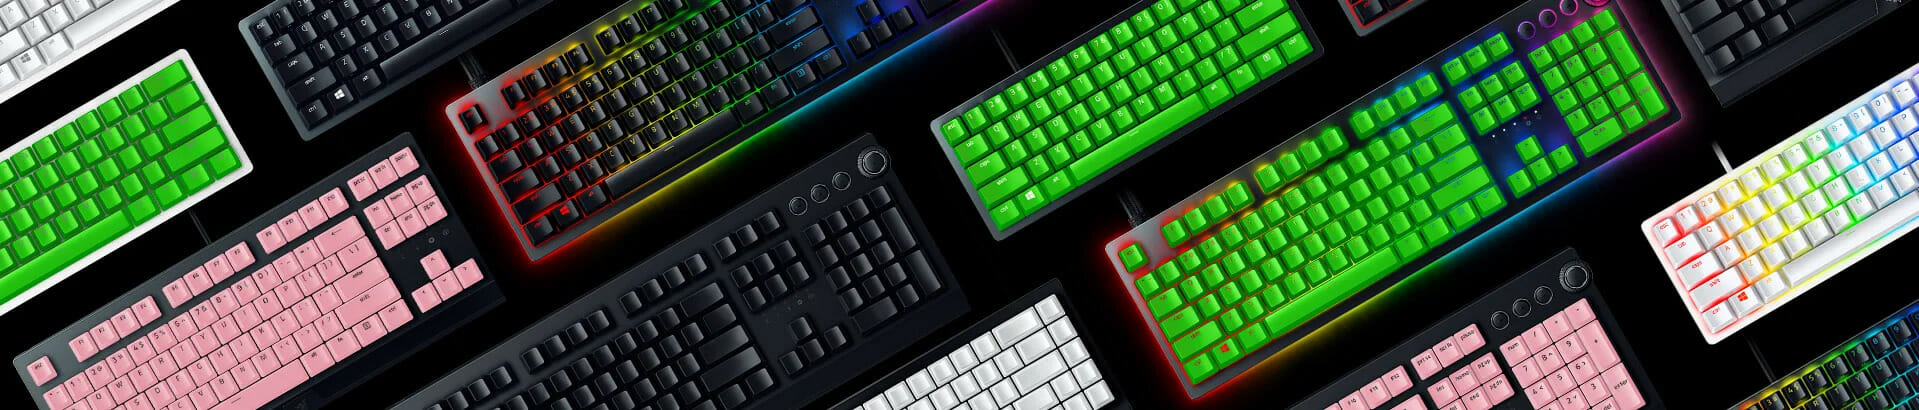 how to change razer keyboard color without synapse